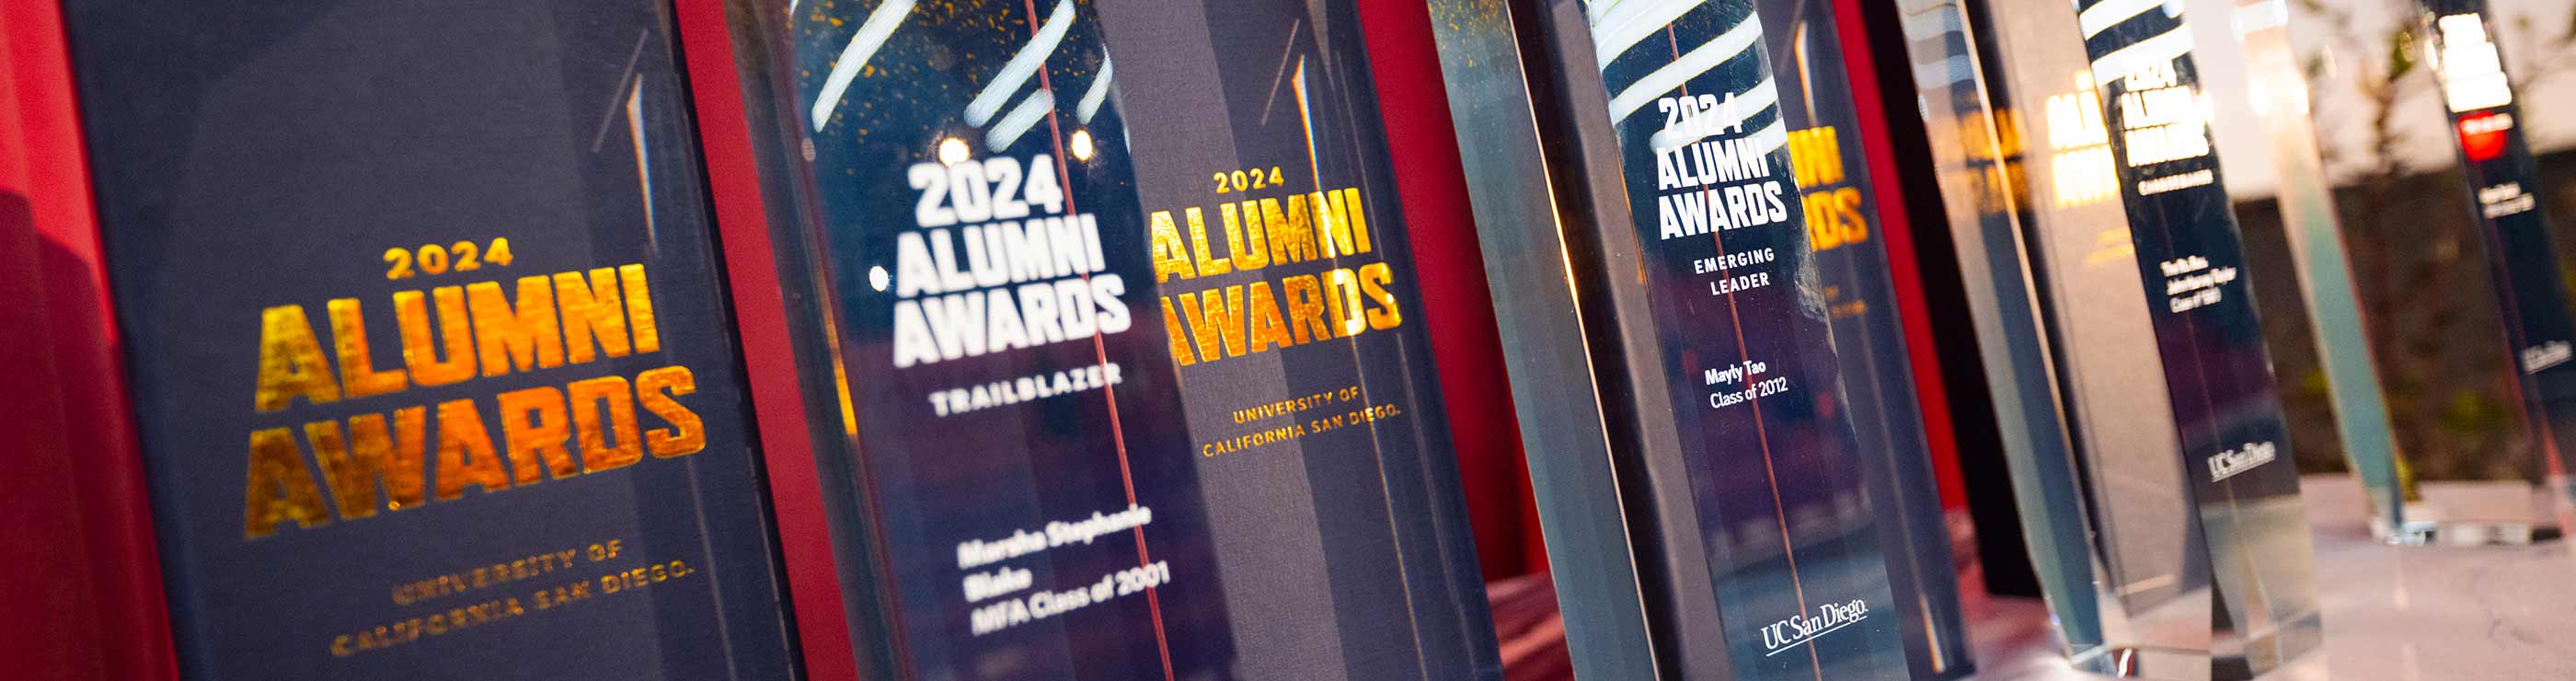 Alumni Awards lined up on stage